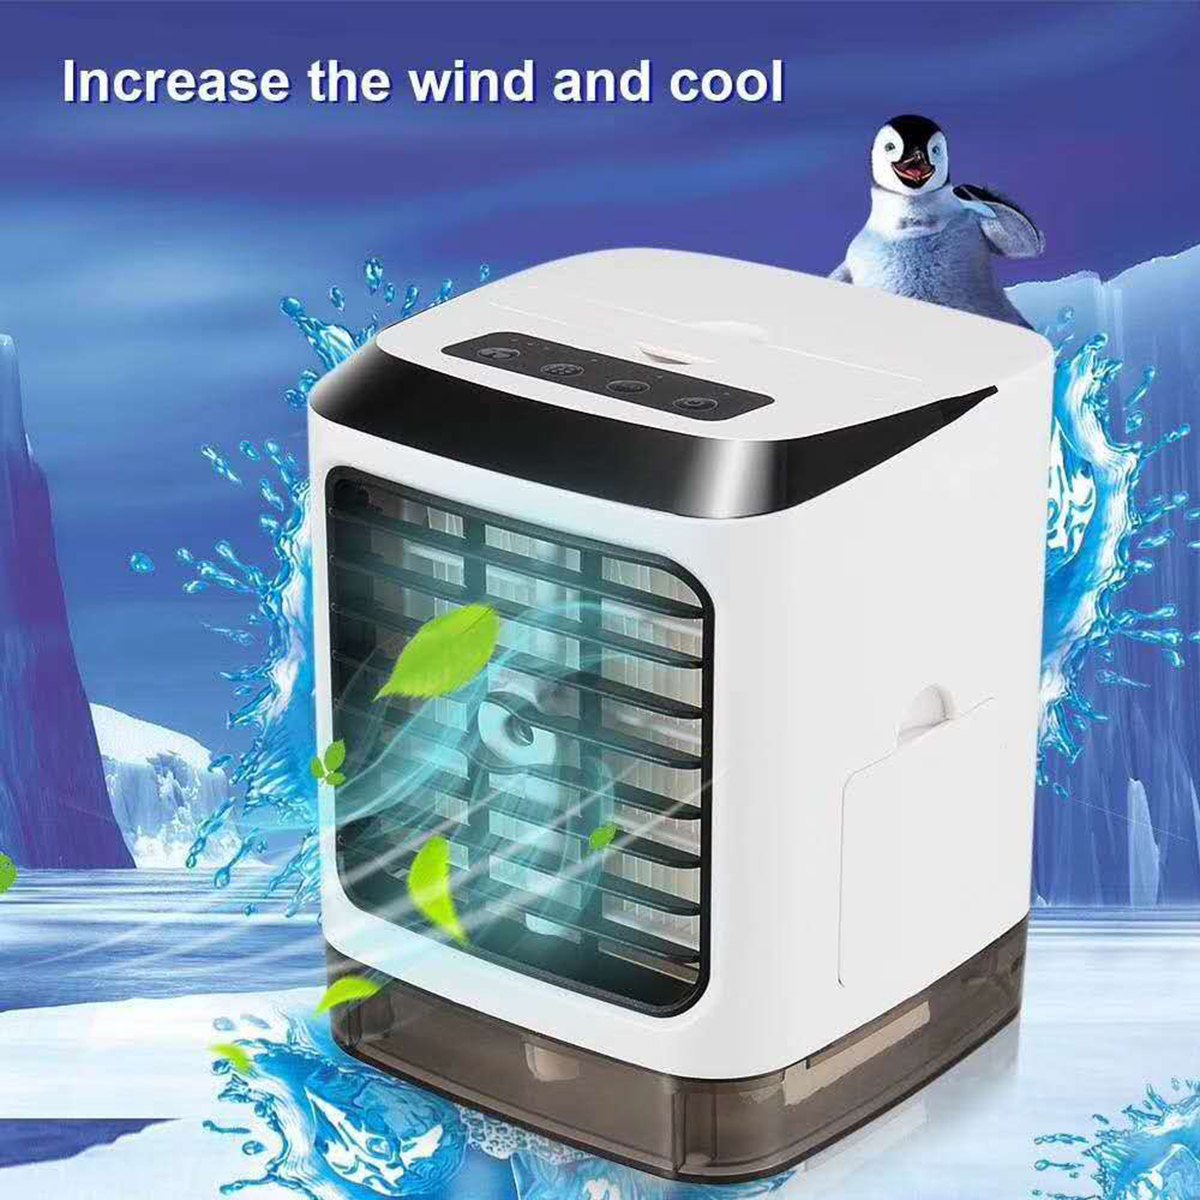 LED-480mL-Personal-Evaporative-Air-Cooler-Humidifier-Portable-Air-Conditioner-Mist-Prayer-USB-Cooler-1479420-2